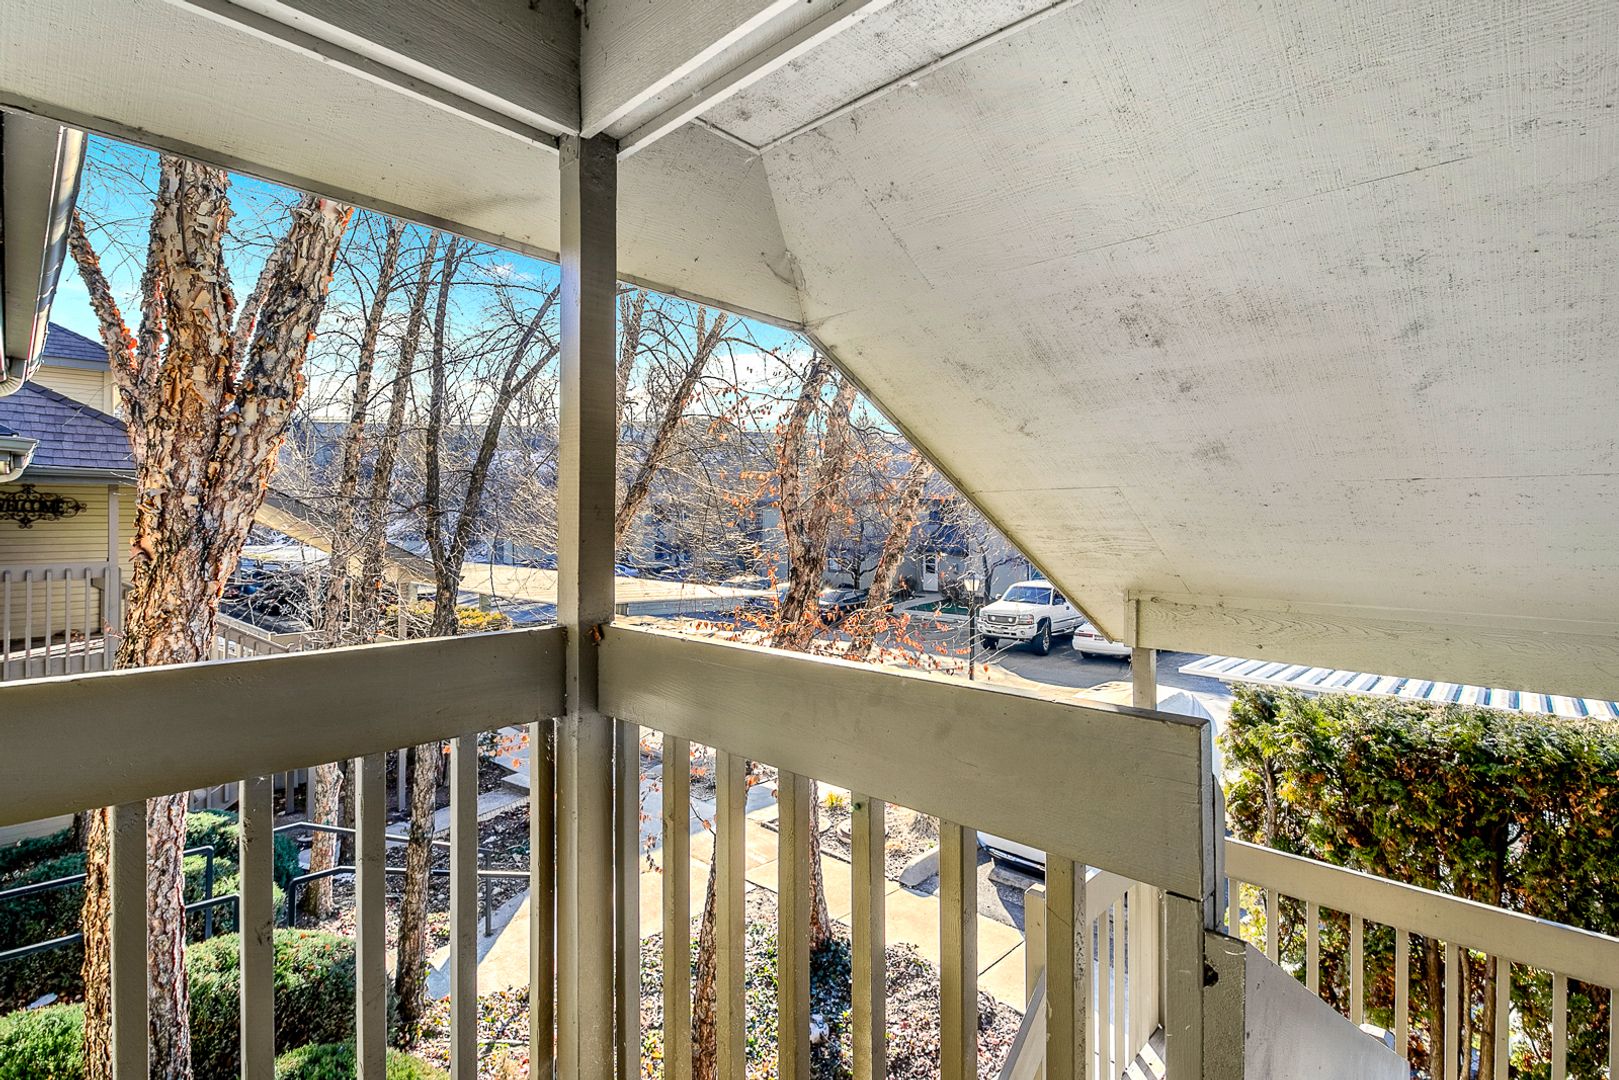 Condo Close to Boise State & Downtown